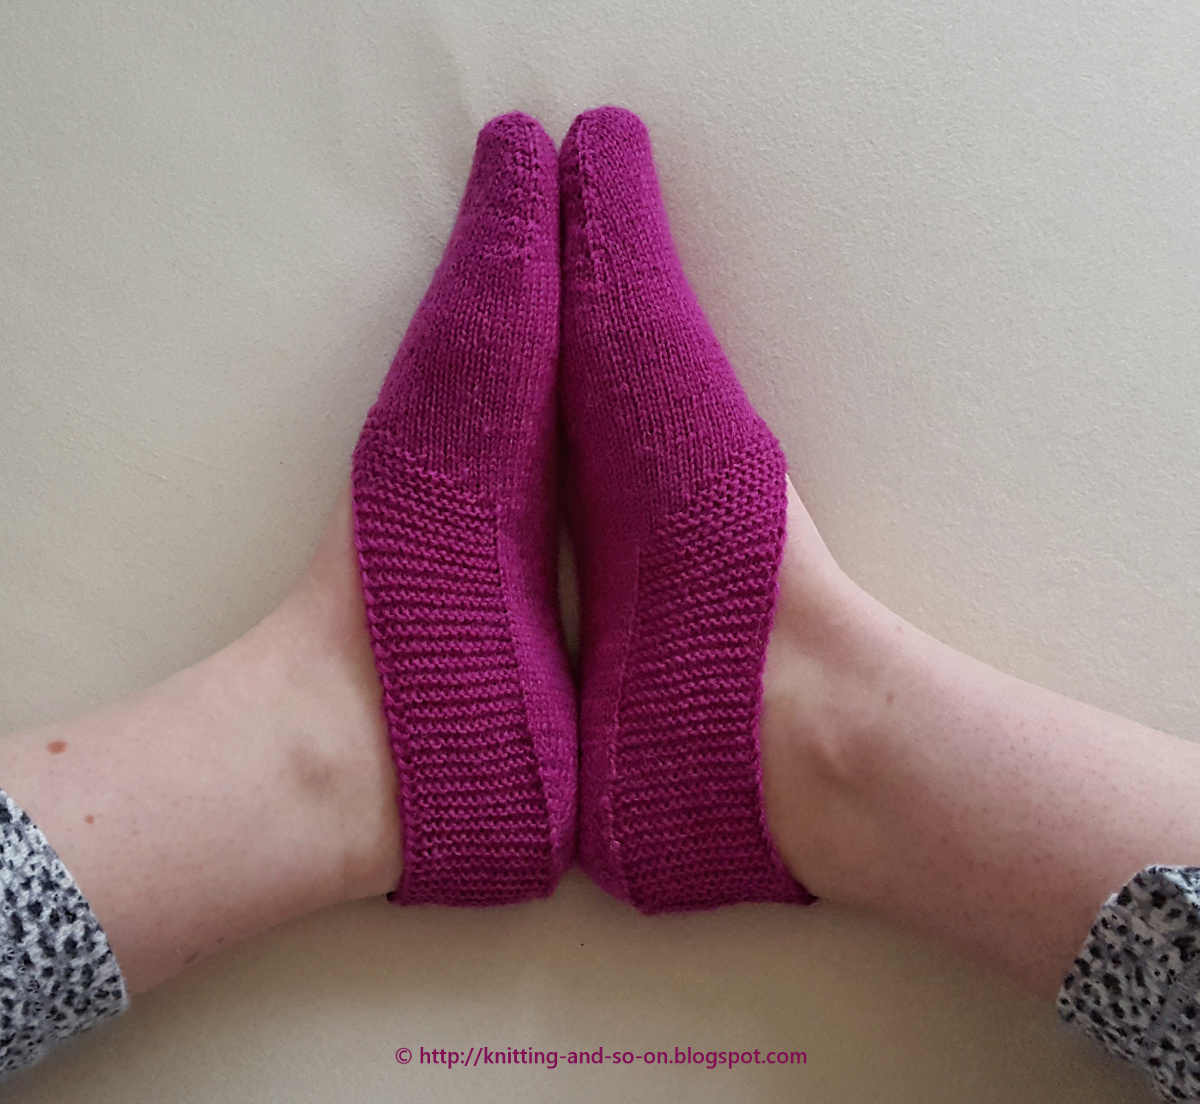 Knitting and so on: Geranium Knitted Slippers